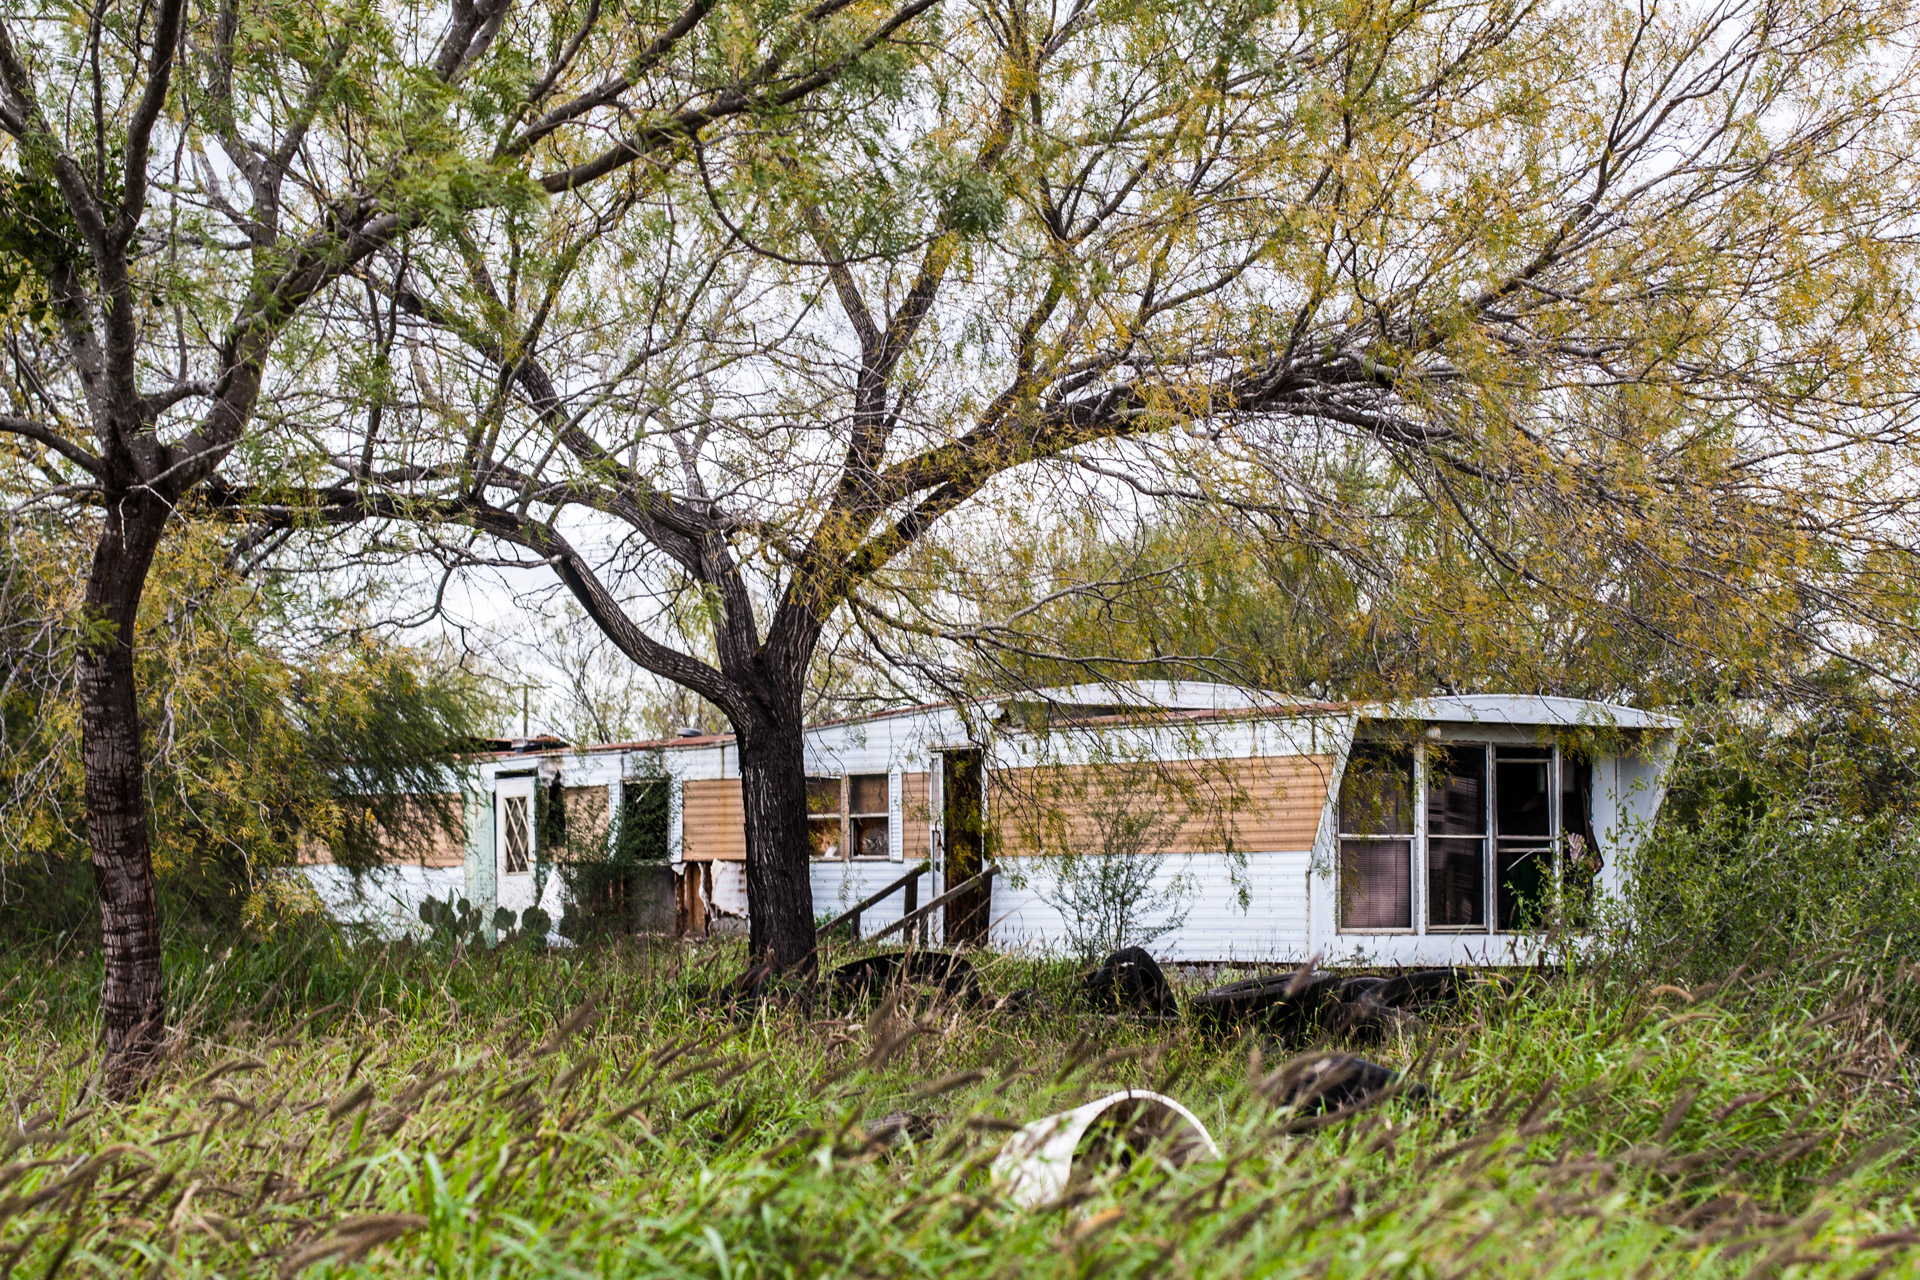 Pearsall, Texas - A Ruin, A Trailer, And Some Tires (trailer mid)